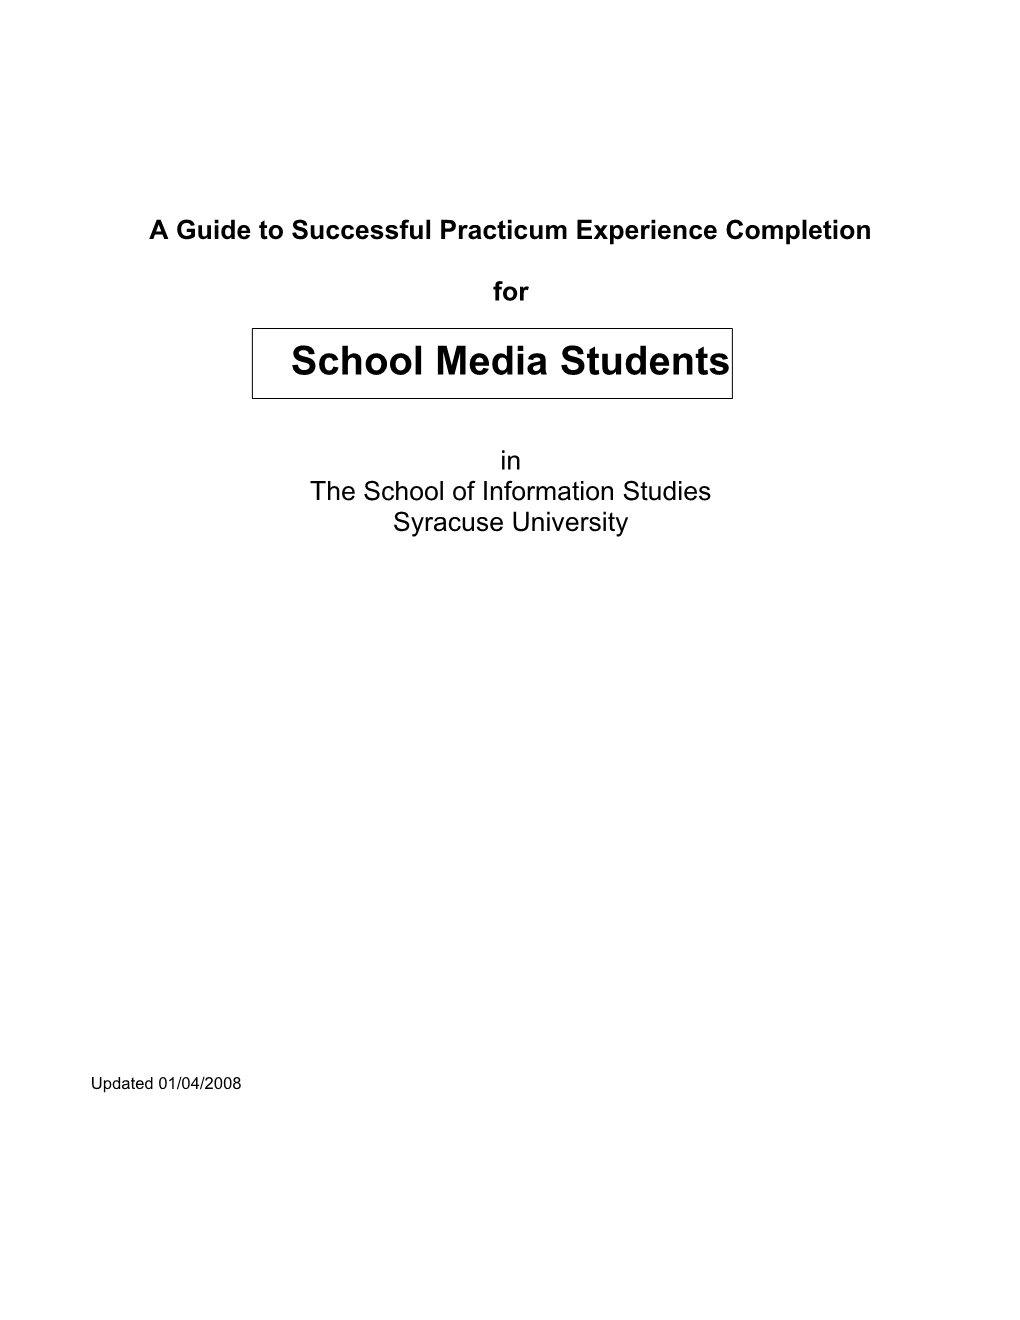 A Guide to Successful Practicum Experience Completion